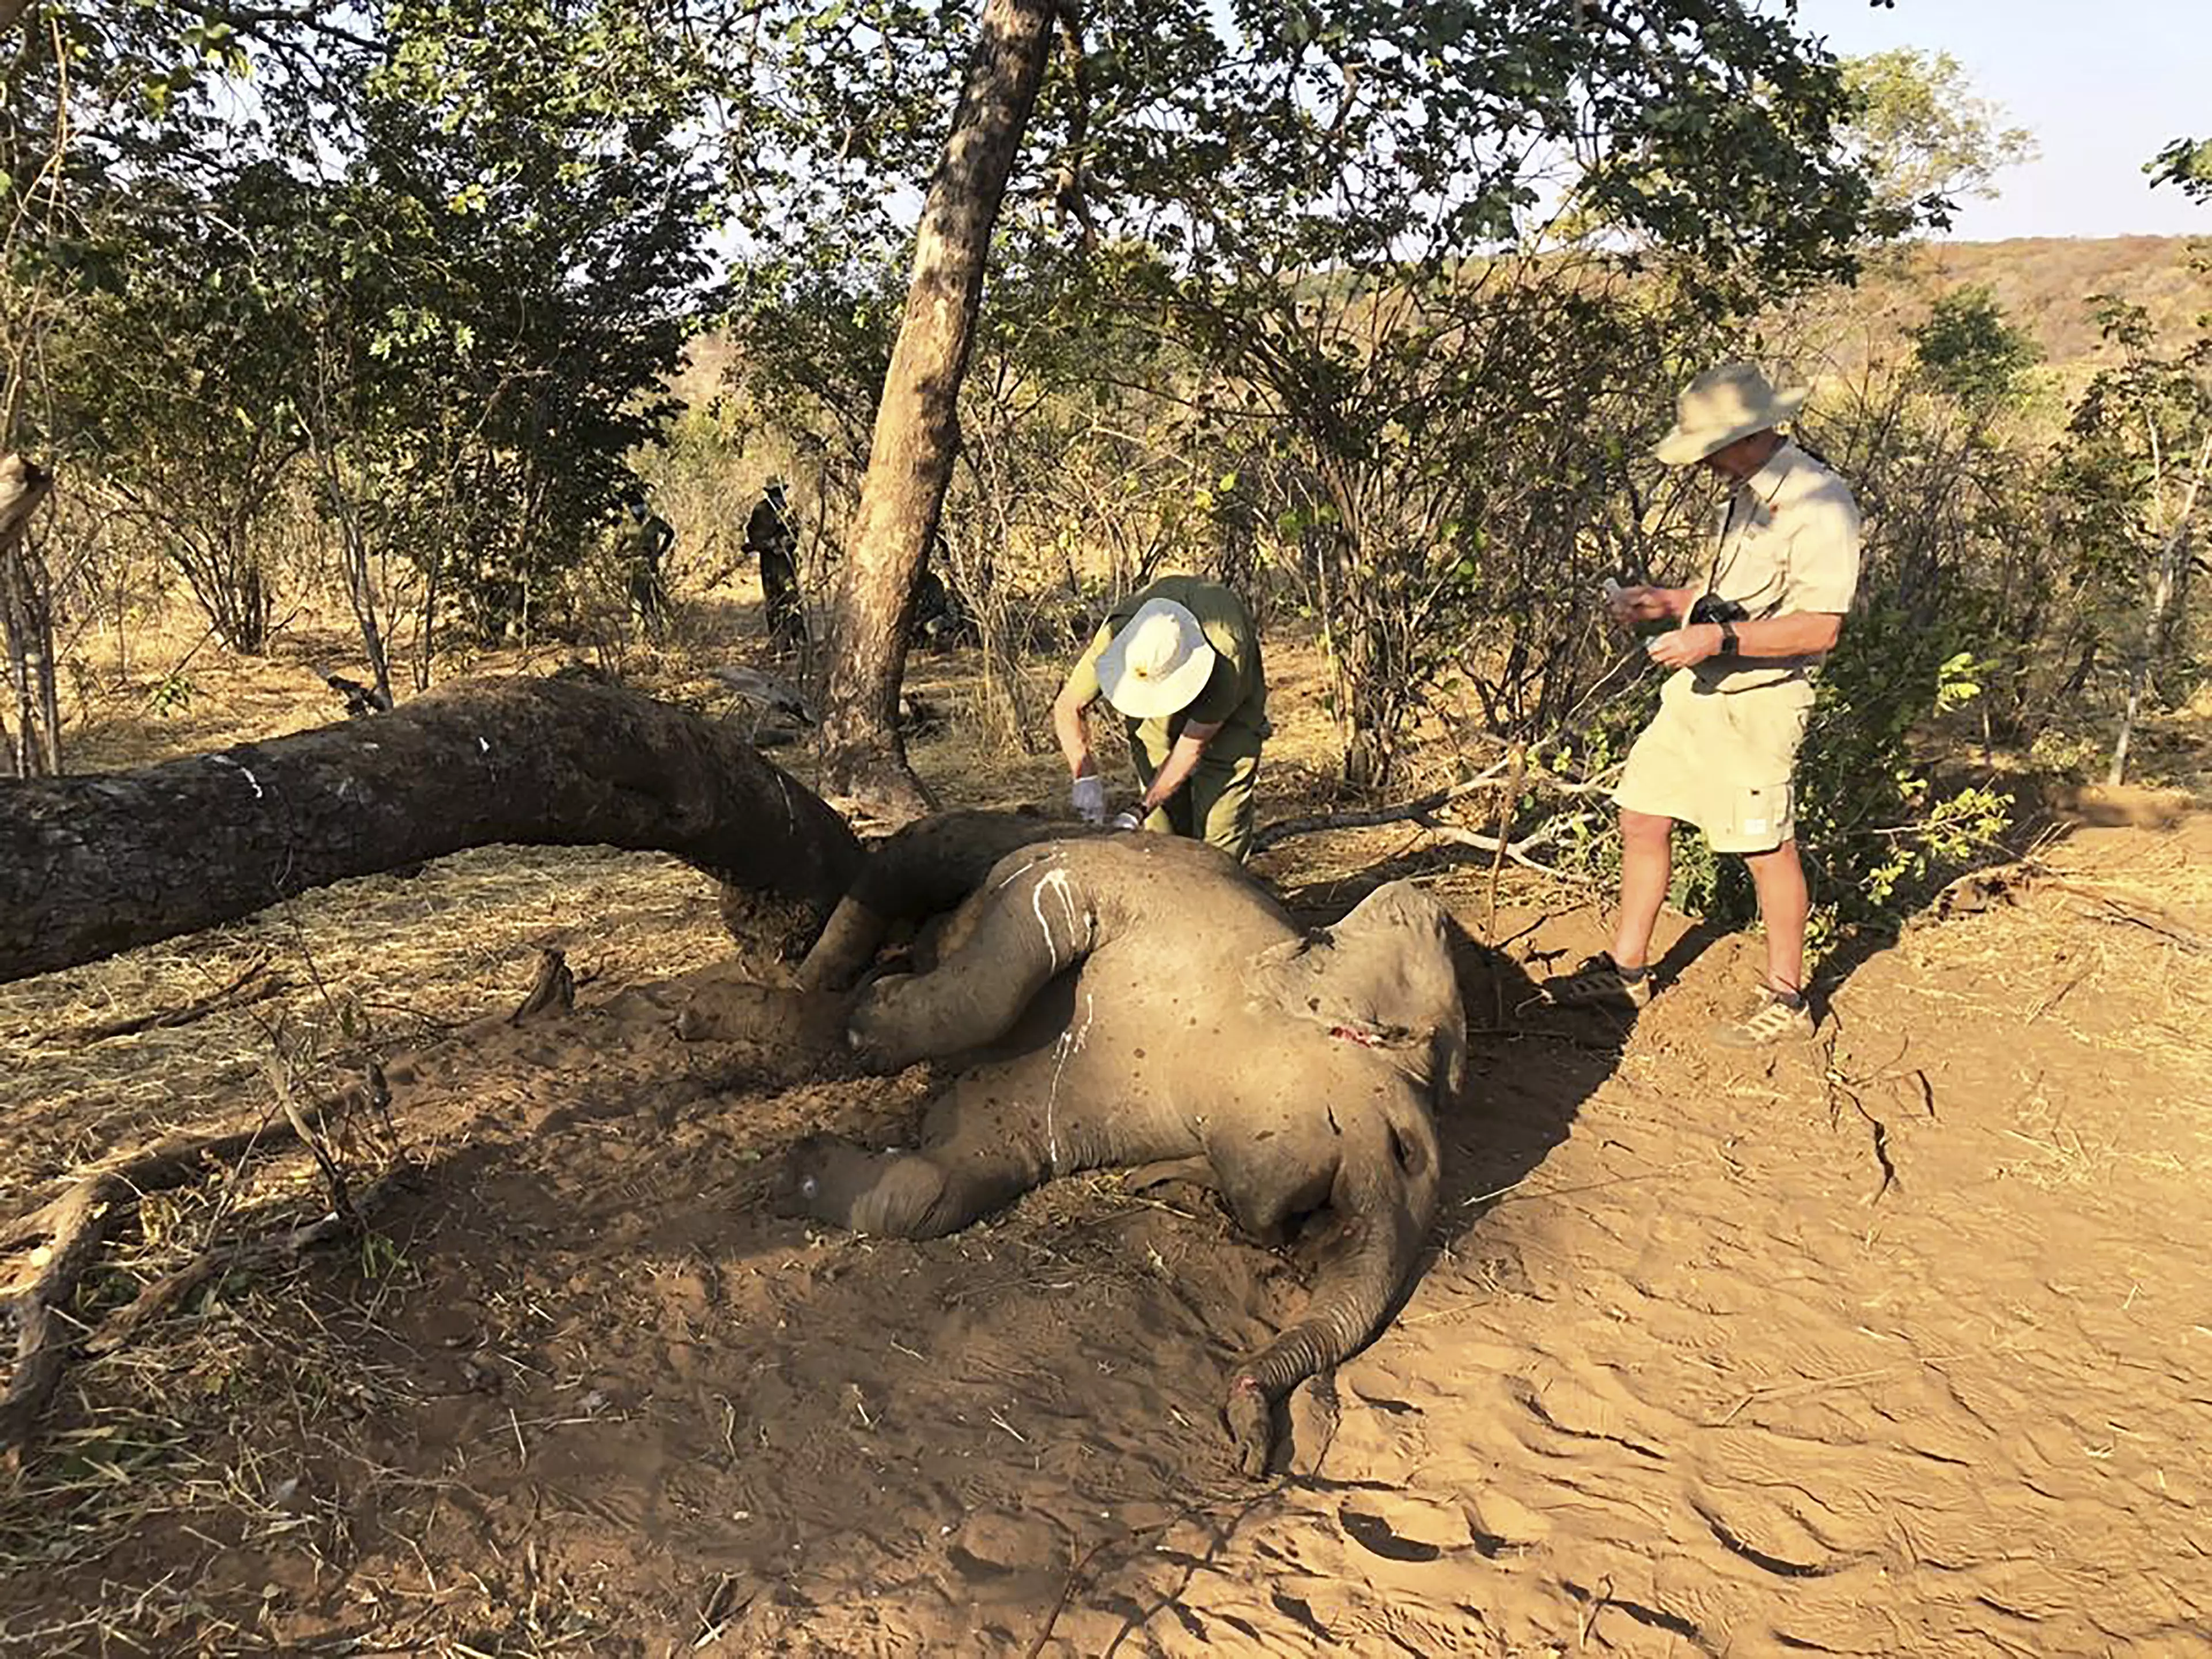 A further 11 elephants have been found dead.